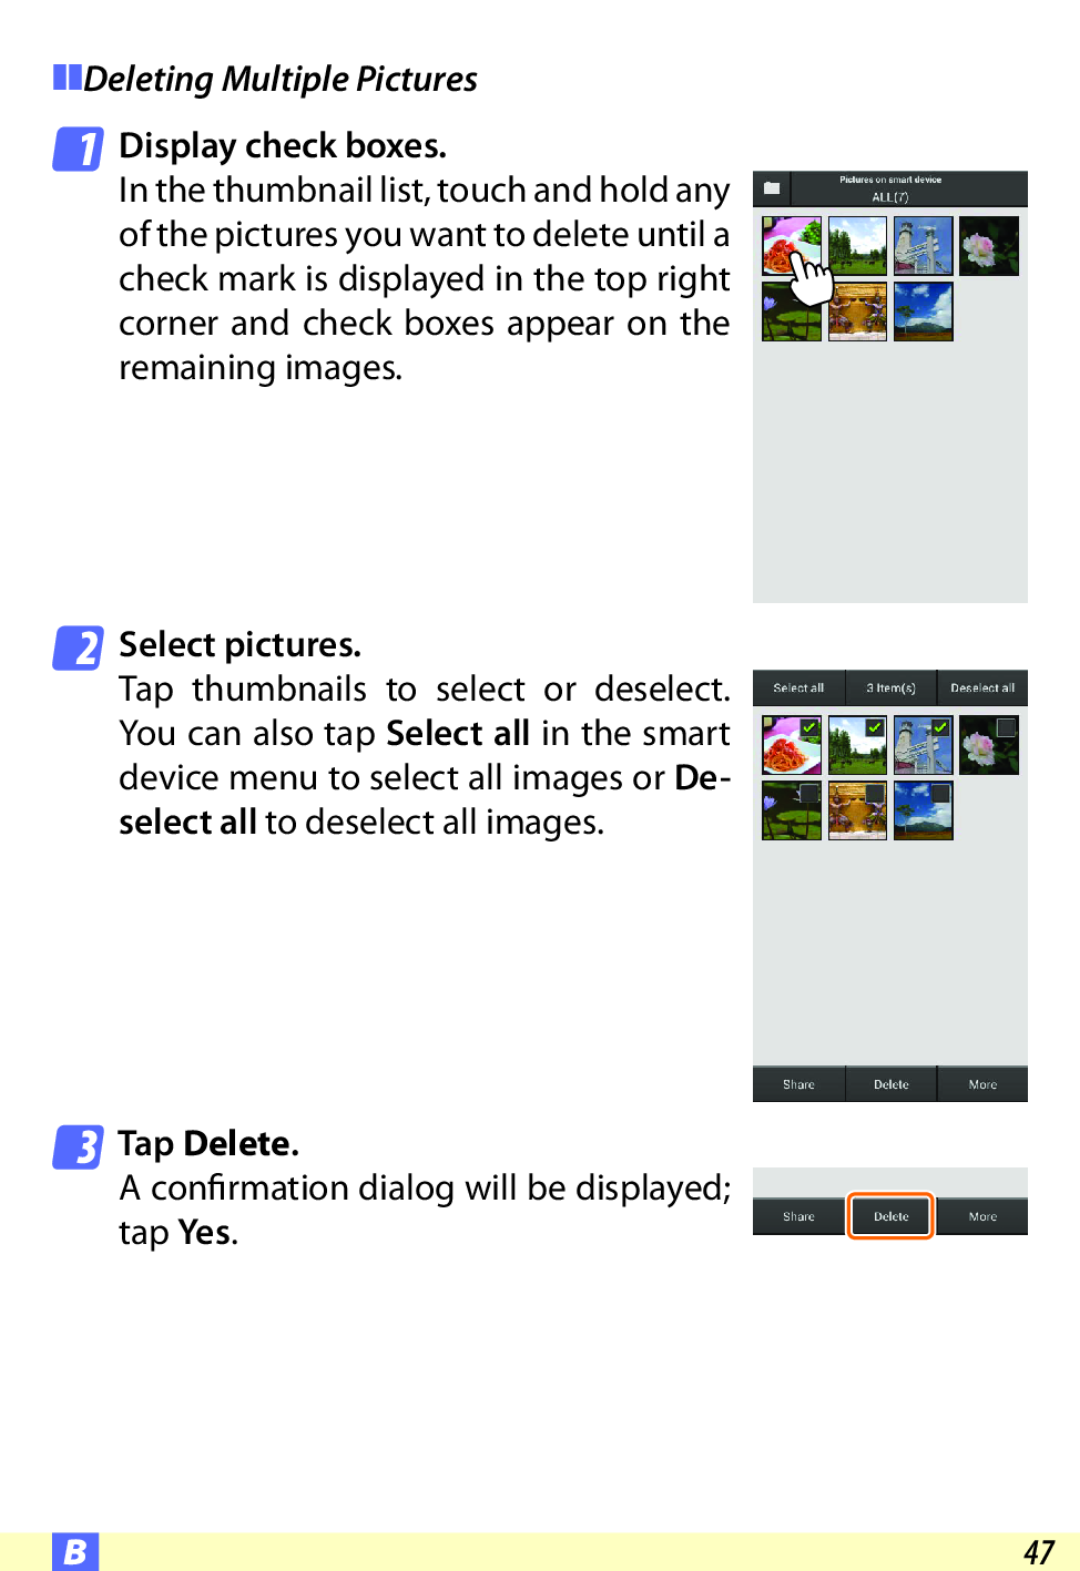 Nikon D600 user manual zzDeleting Multiple Pictures, Display check boxes, Select pictures, Tap Delete 